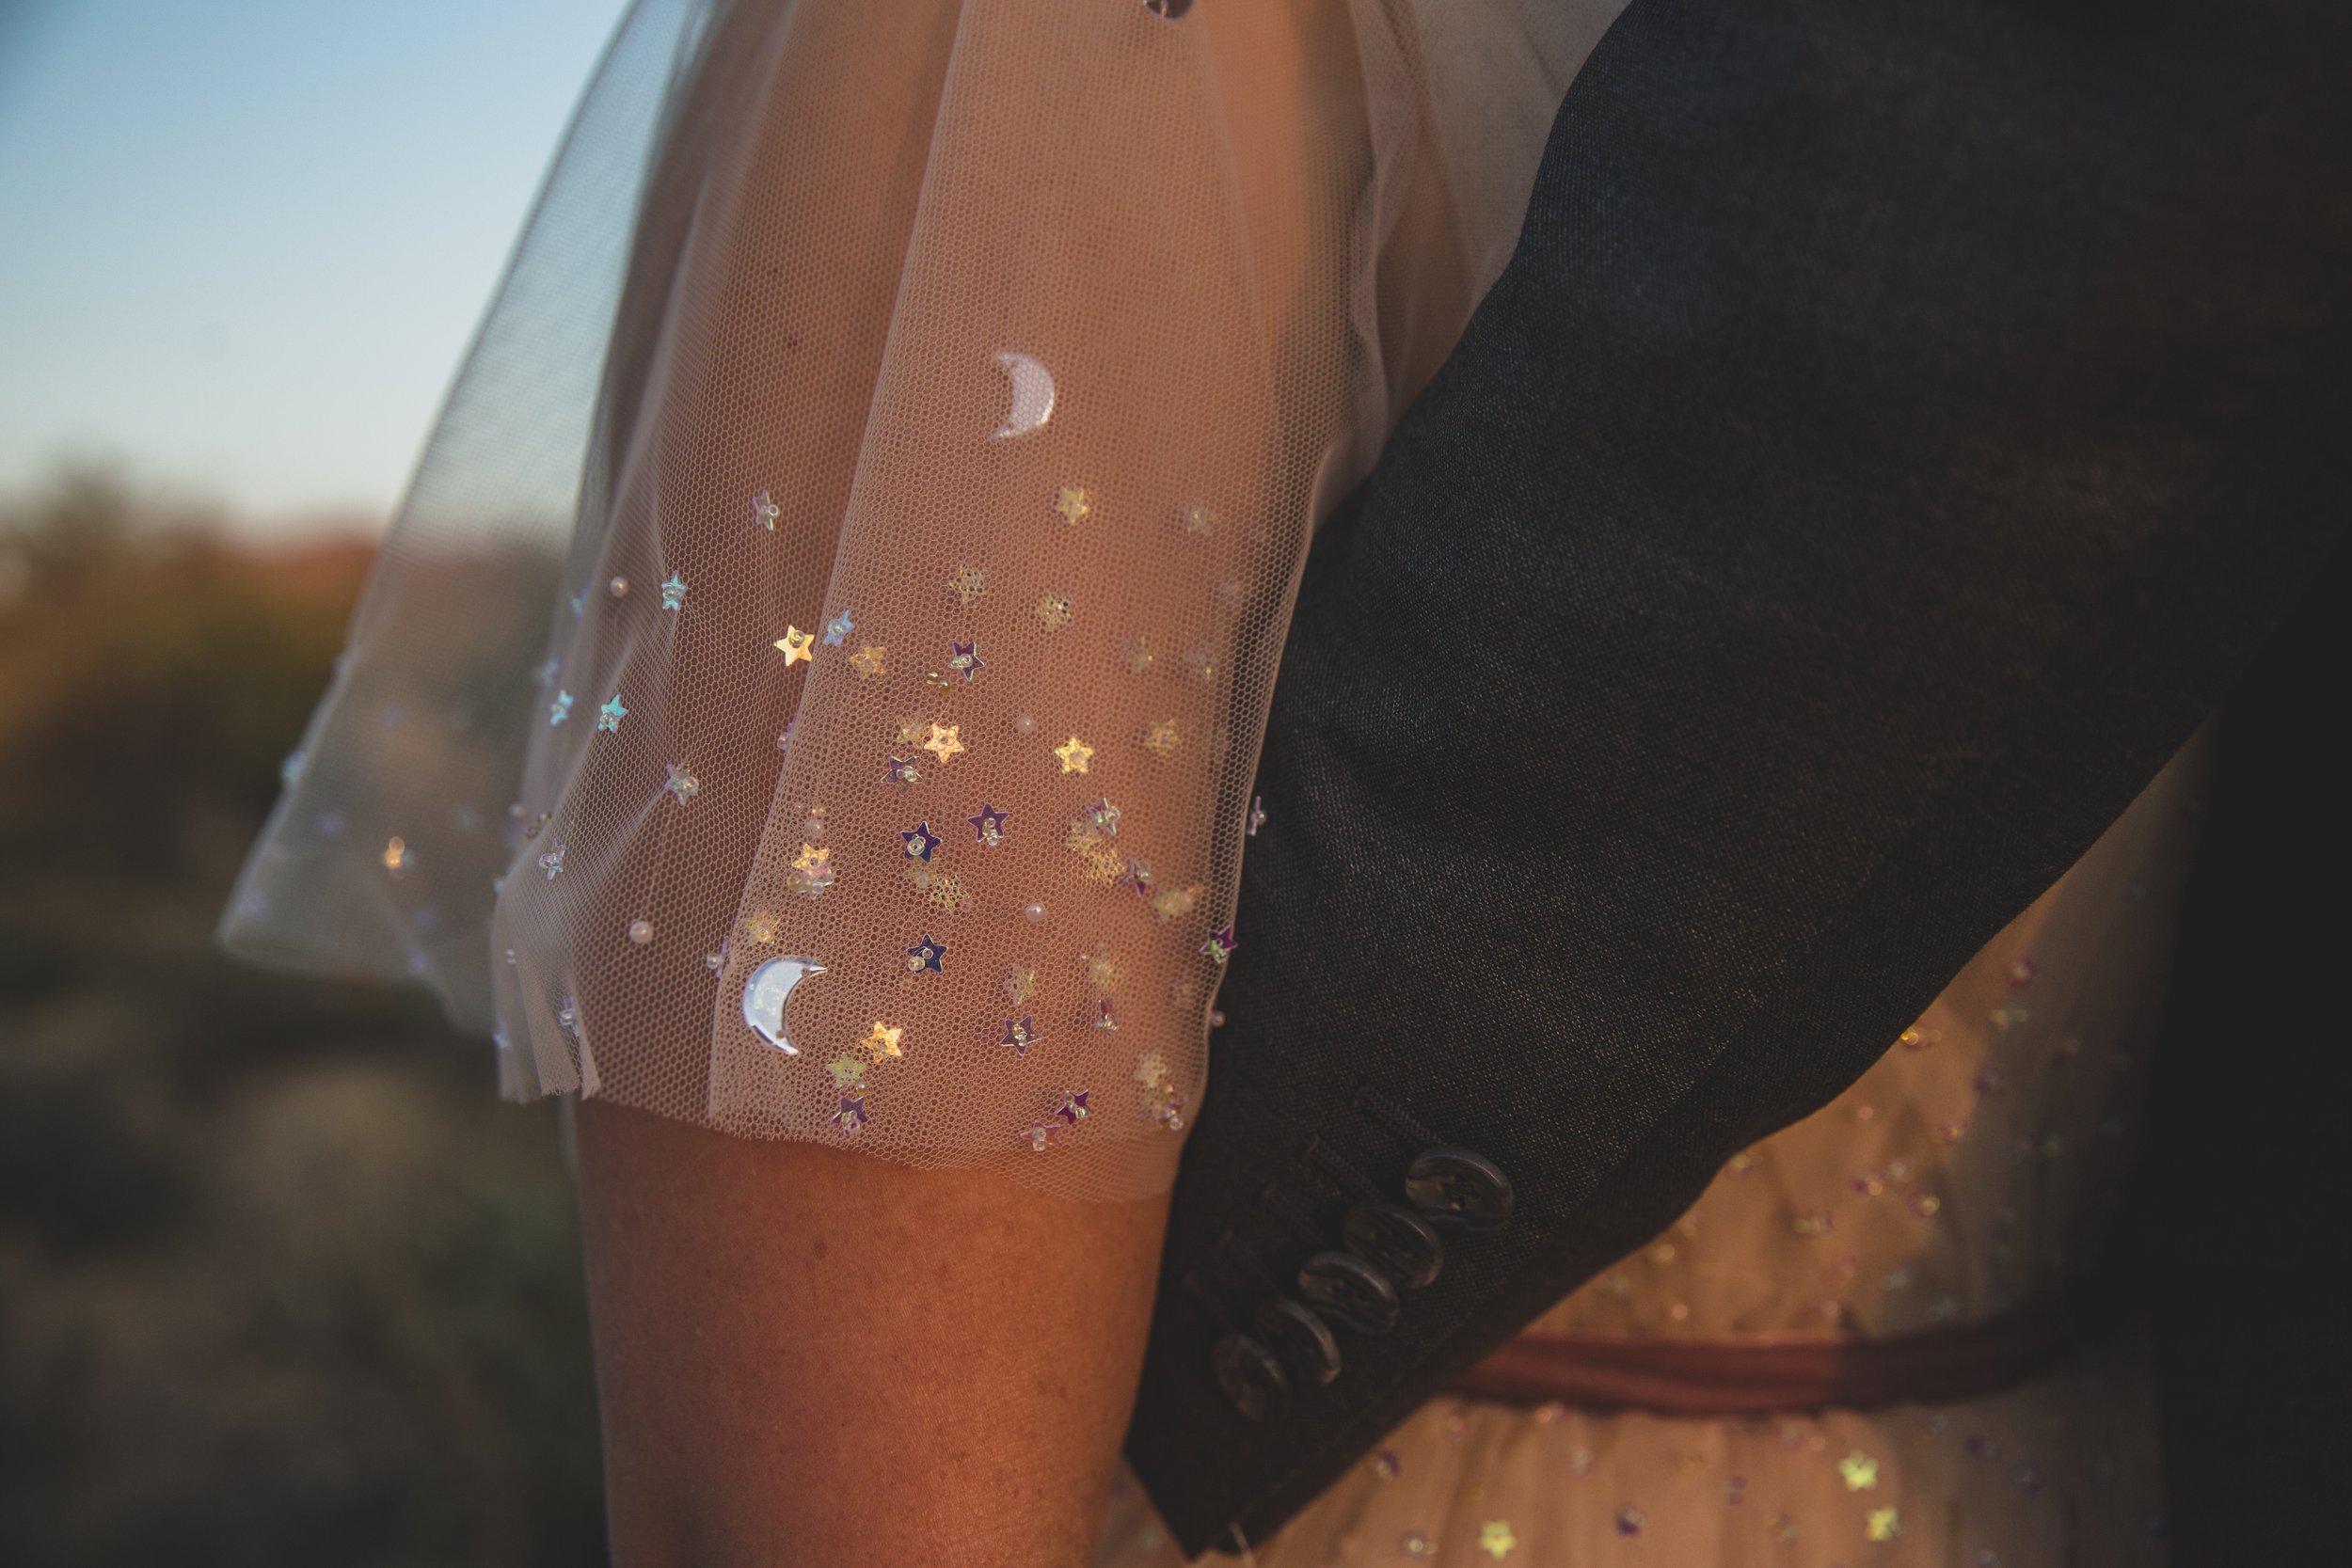 Details of handmade wedding dress, outfit inspiration for intimate Superstition Mountain micro wedding in Arizona by experienced wedding photographer, Jennifer Lind Schutsky. 